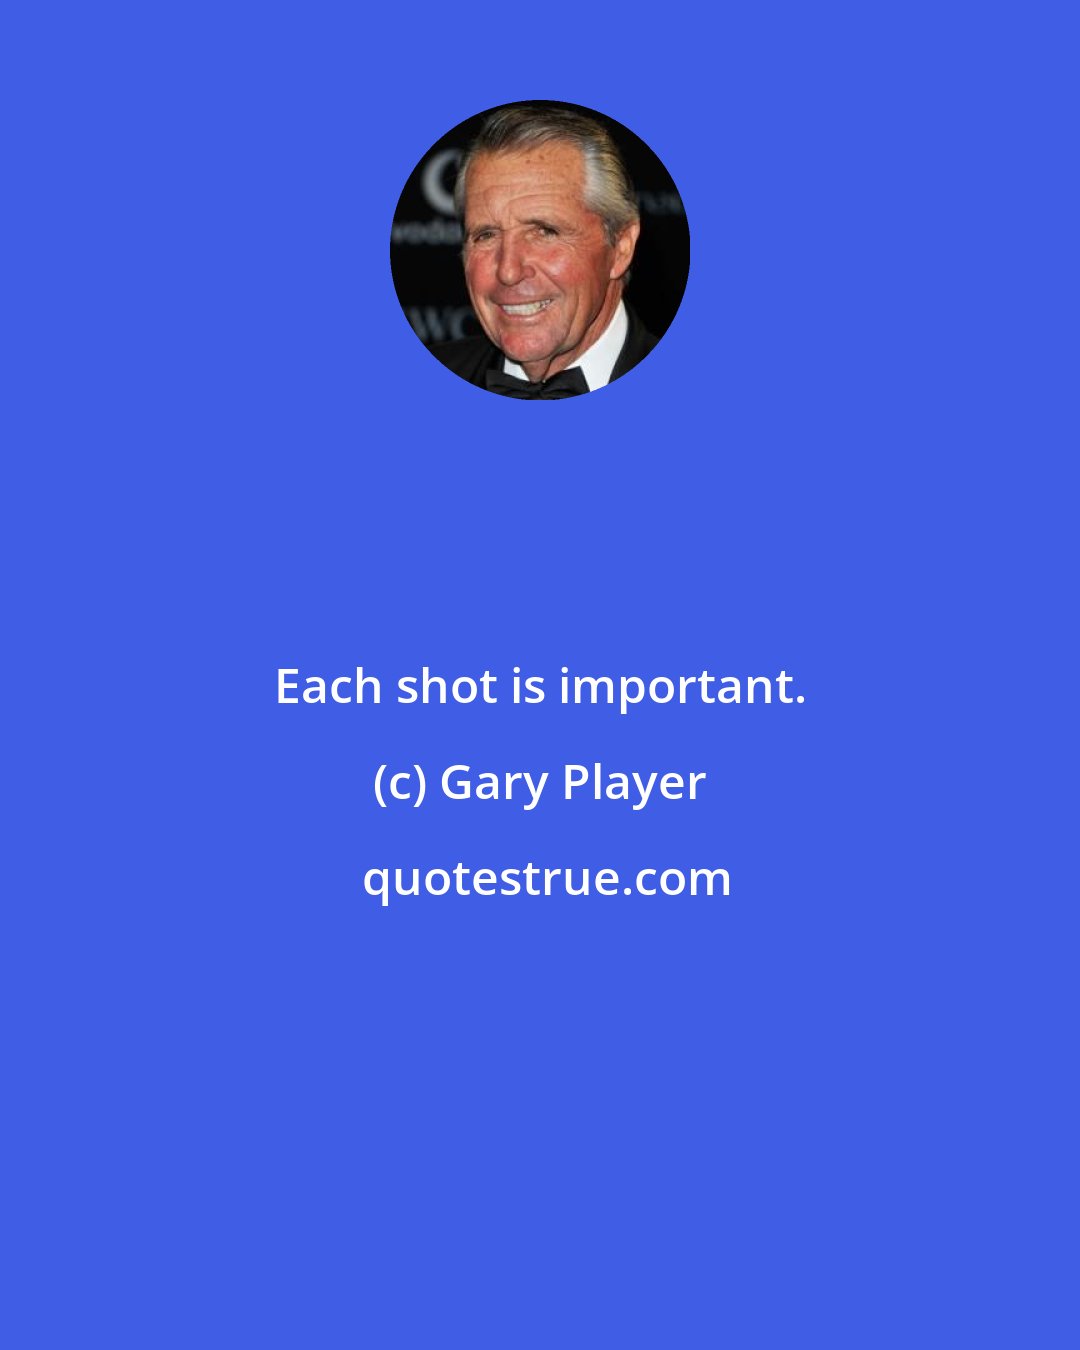 Gary Player: Each shot is important.